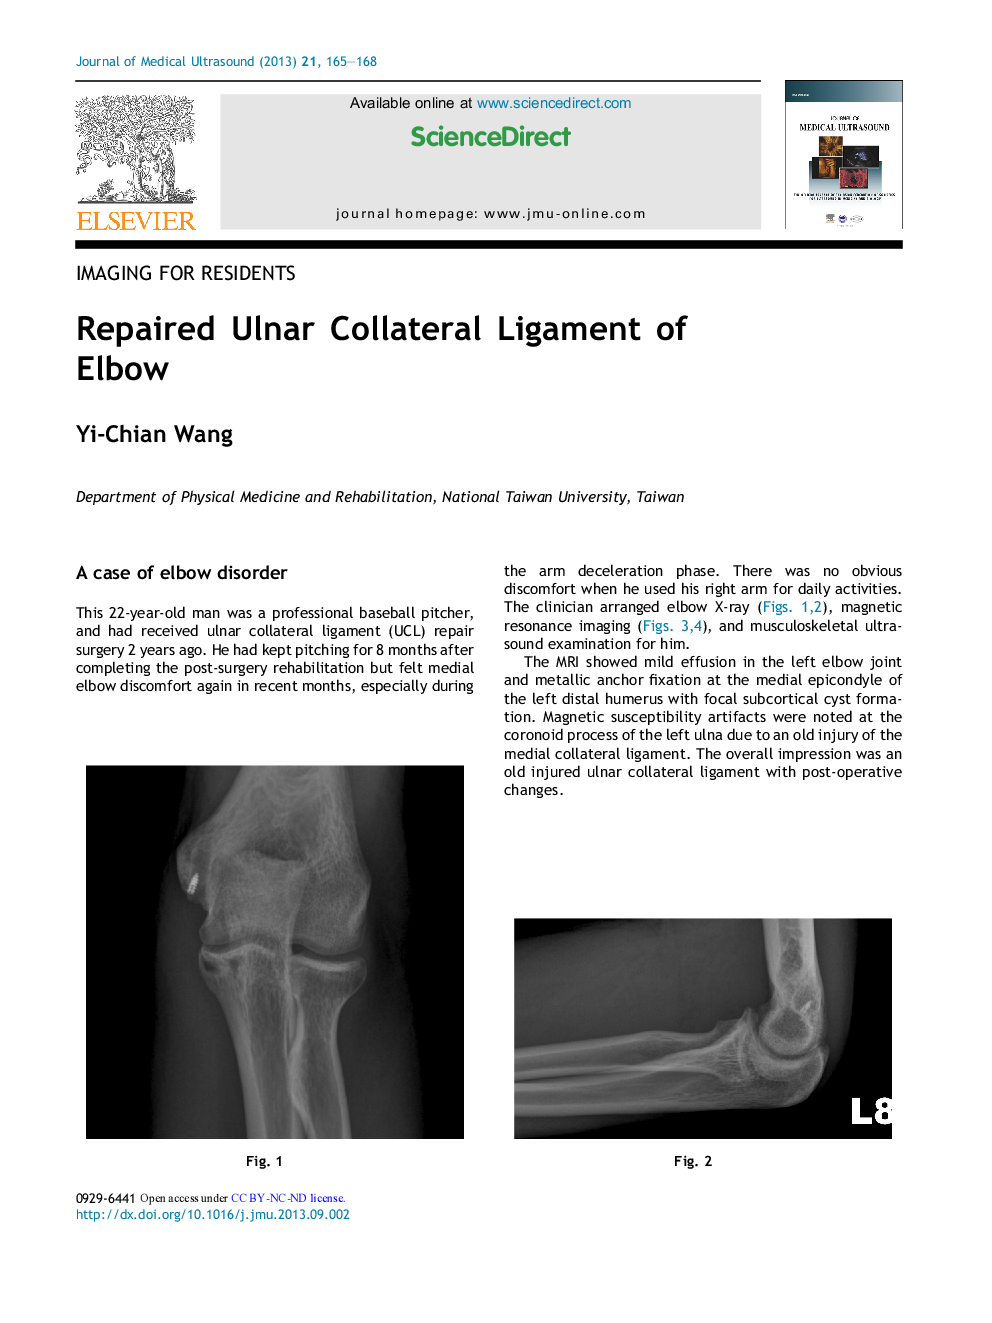 Repaired Ulnar Collateral Ligament of Elbow